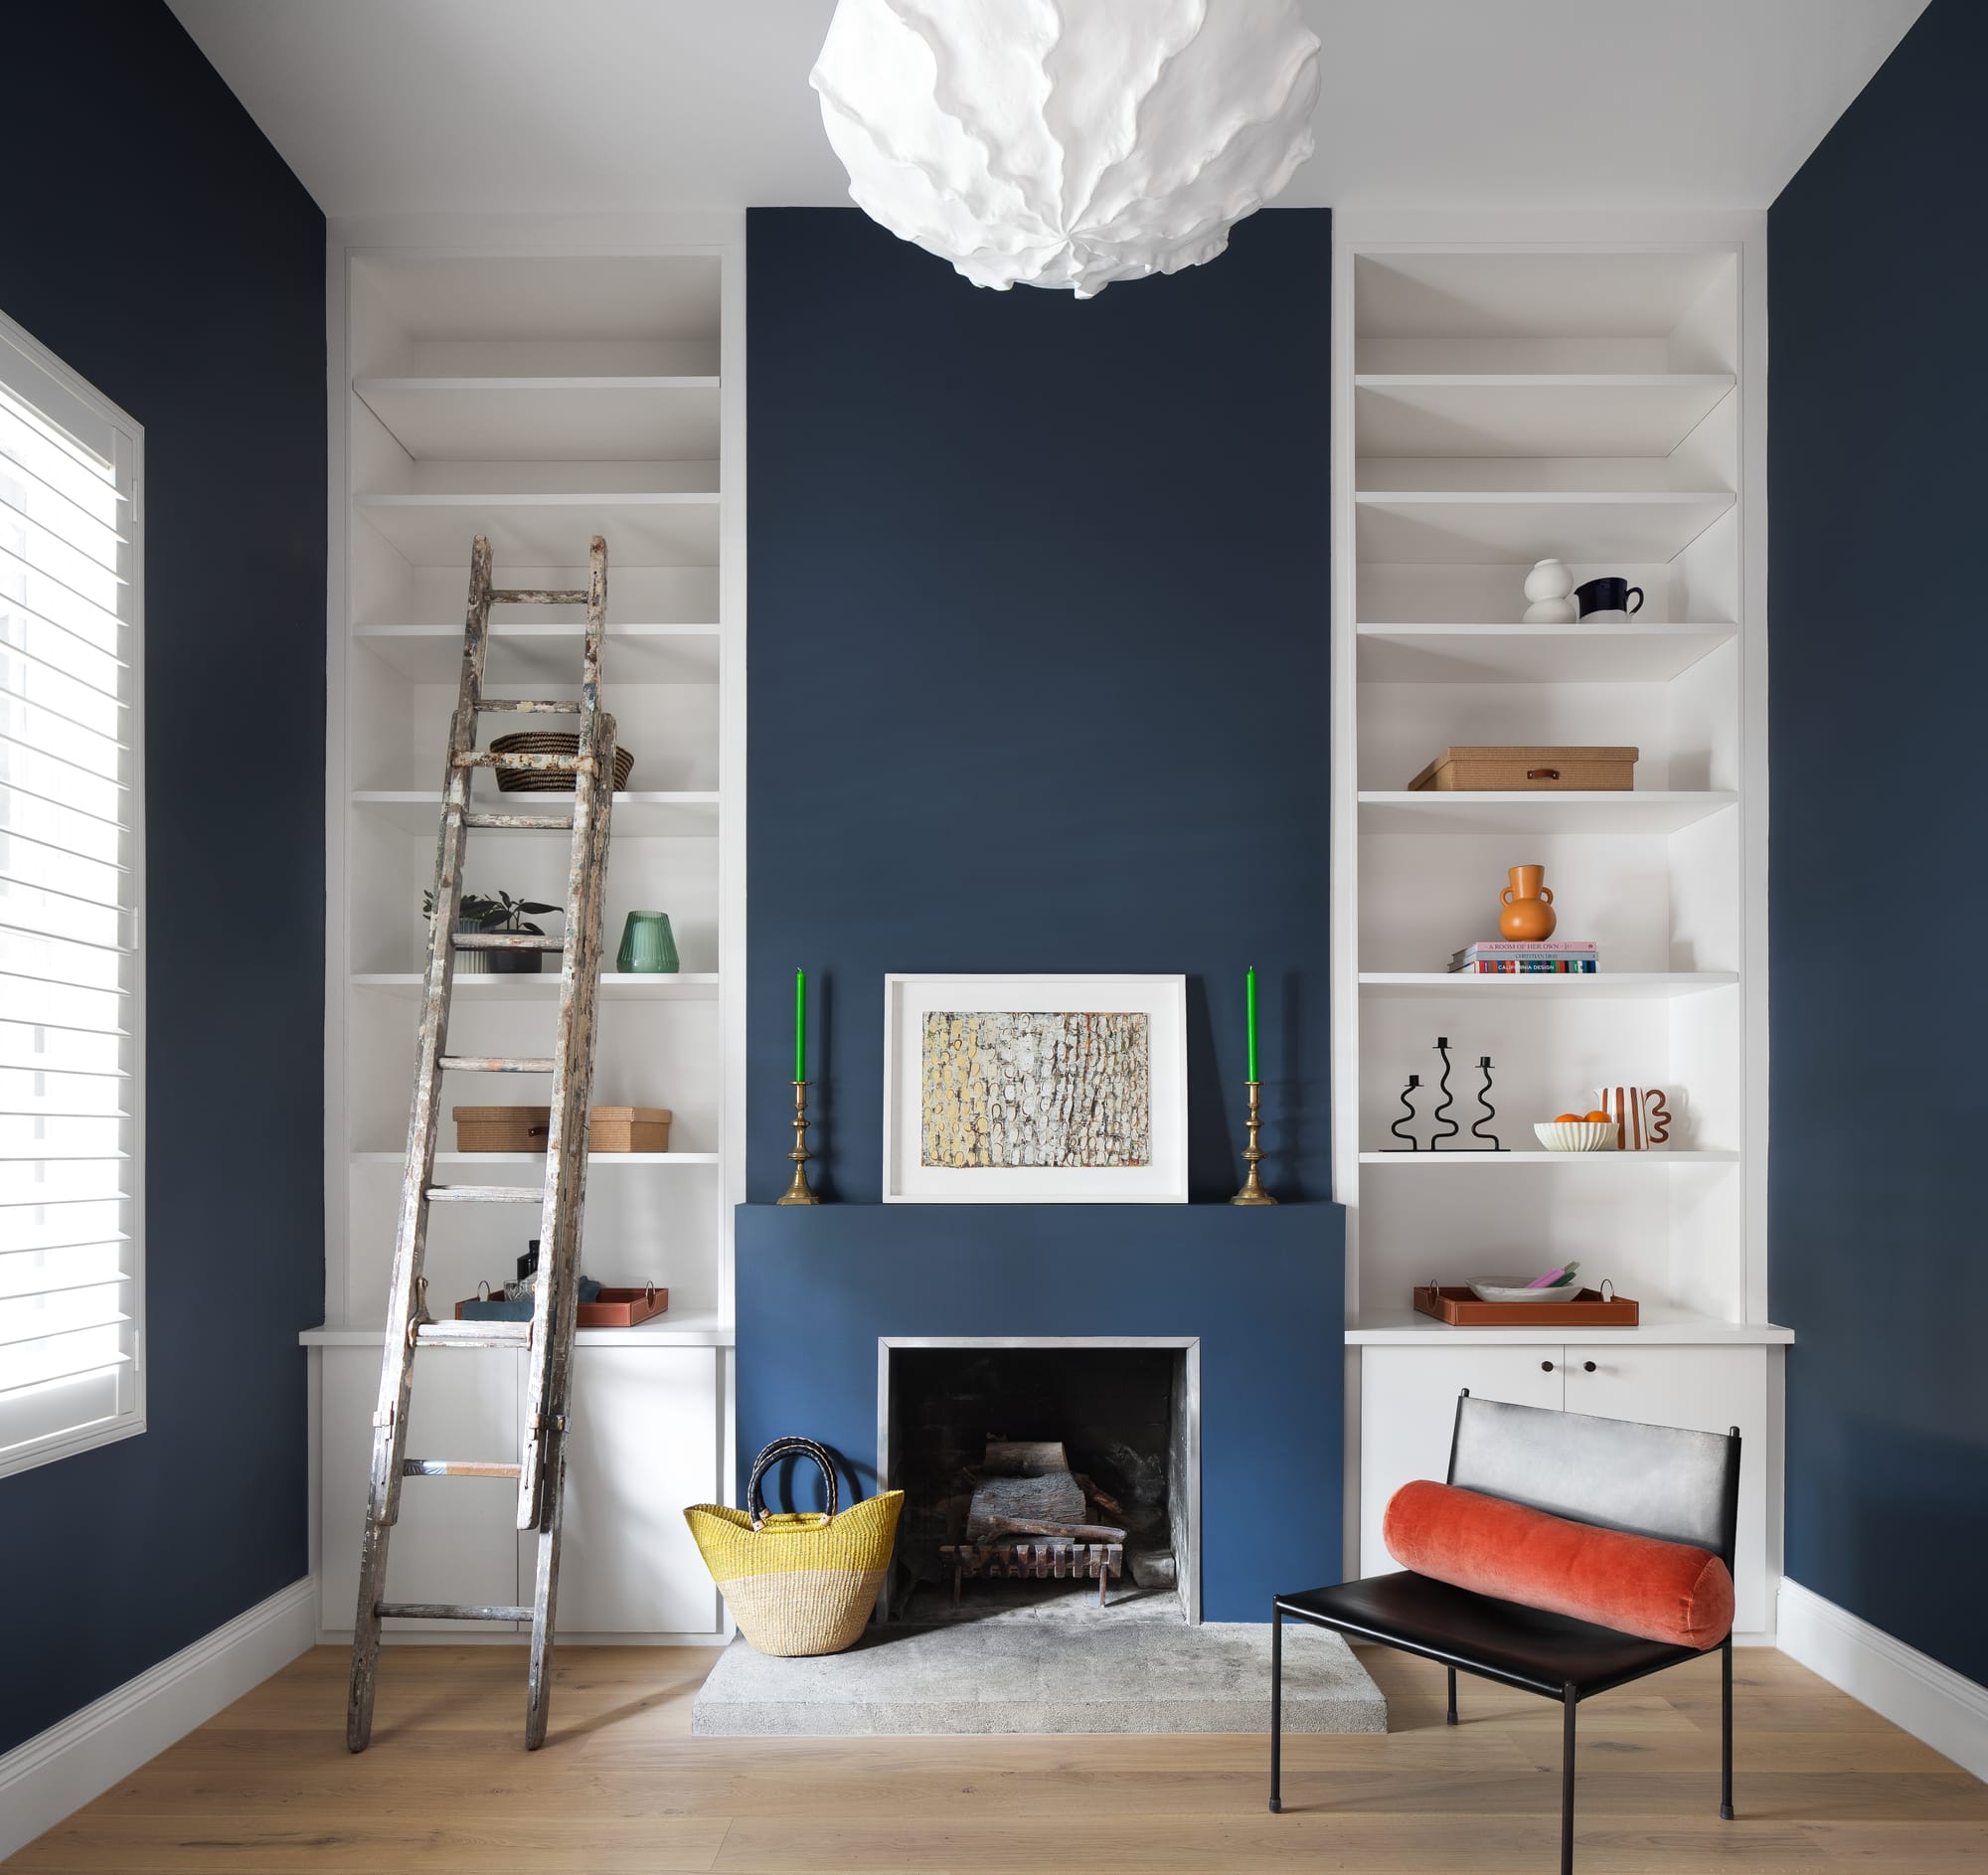 Stead House by Hannaford Design Studio. Photography by Emily Bartlett. Living space with navy feature wall and fireplace. Timber floors and white floor-to-ceiling shelving. Leather chair on right with orange cushion.